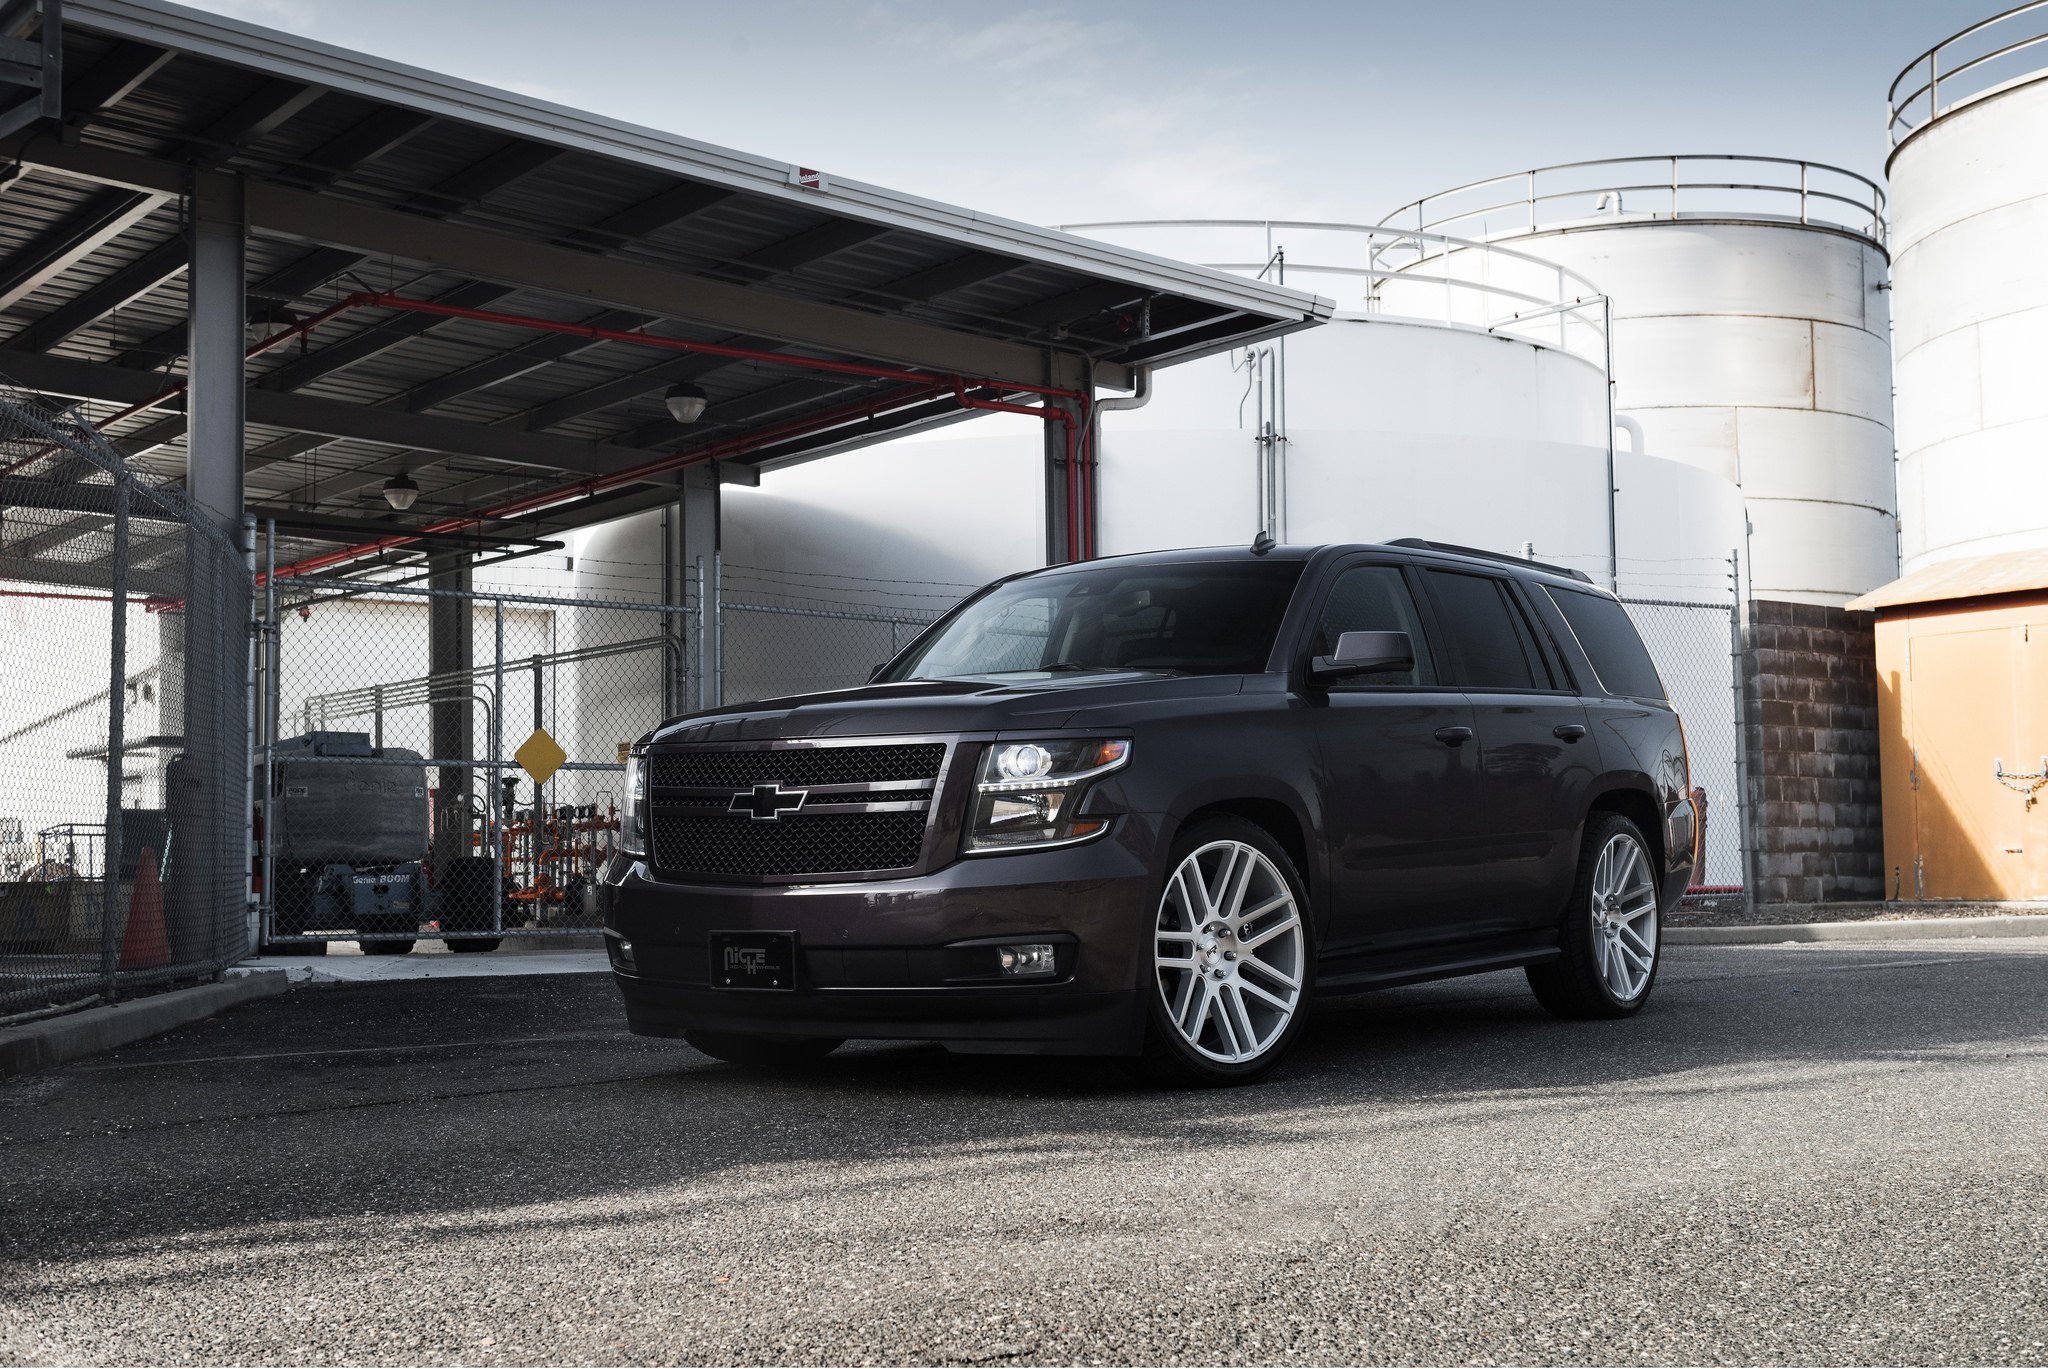 Custom Mesh Grille on Black Chevy Tahoe - Photo by Niche Road Wheels